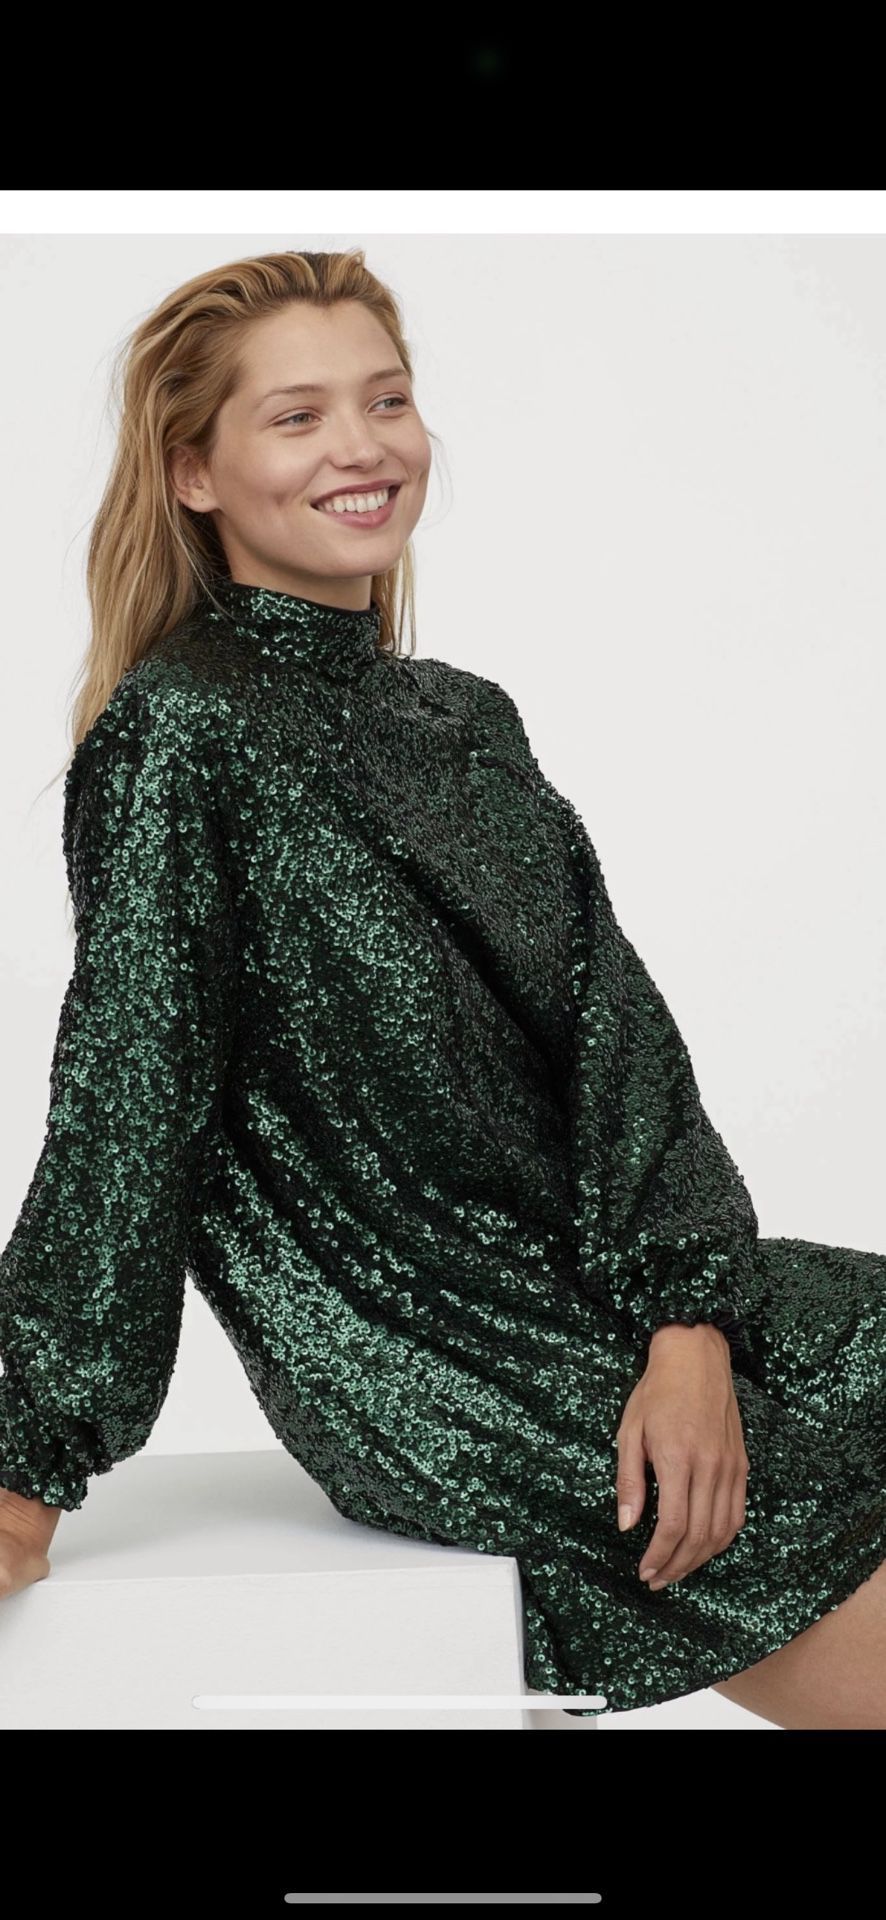 H&M Sequined Green Dress